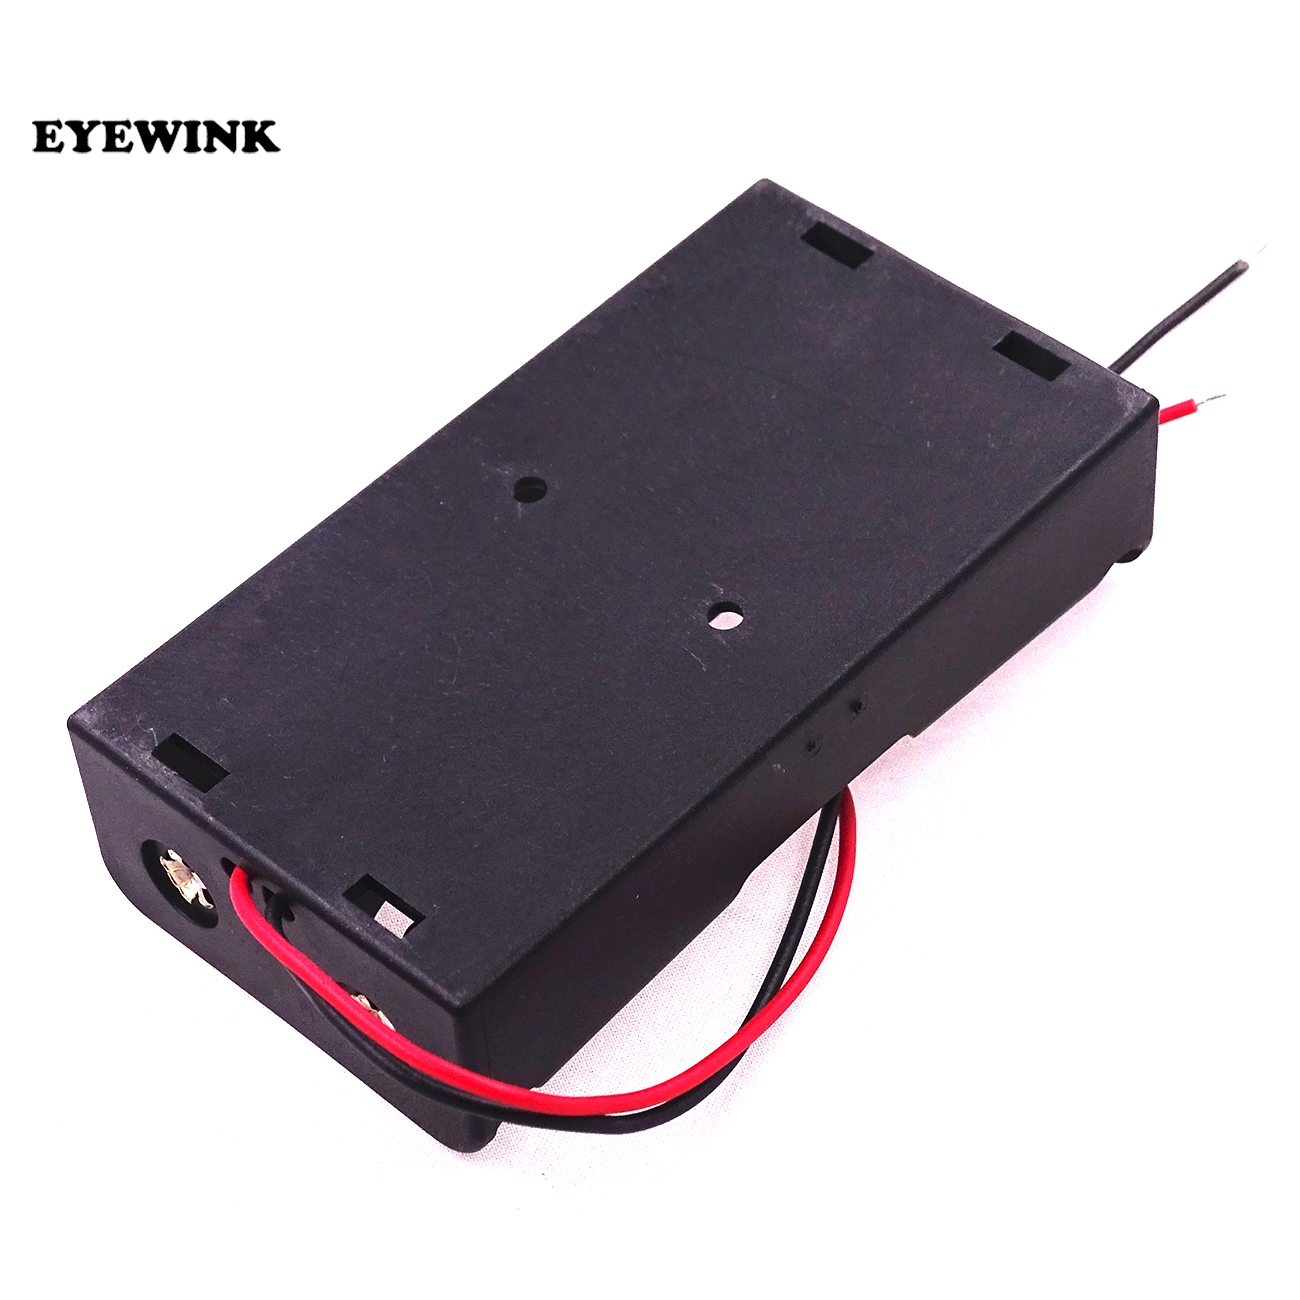 18650 Battery Case Storage Box Case Plastic Holder With Wire Leads for 2 x 18650 Batteries Soldering